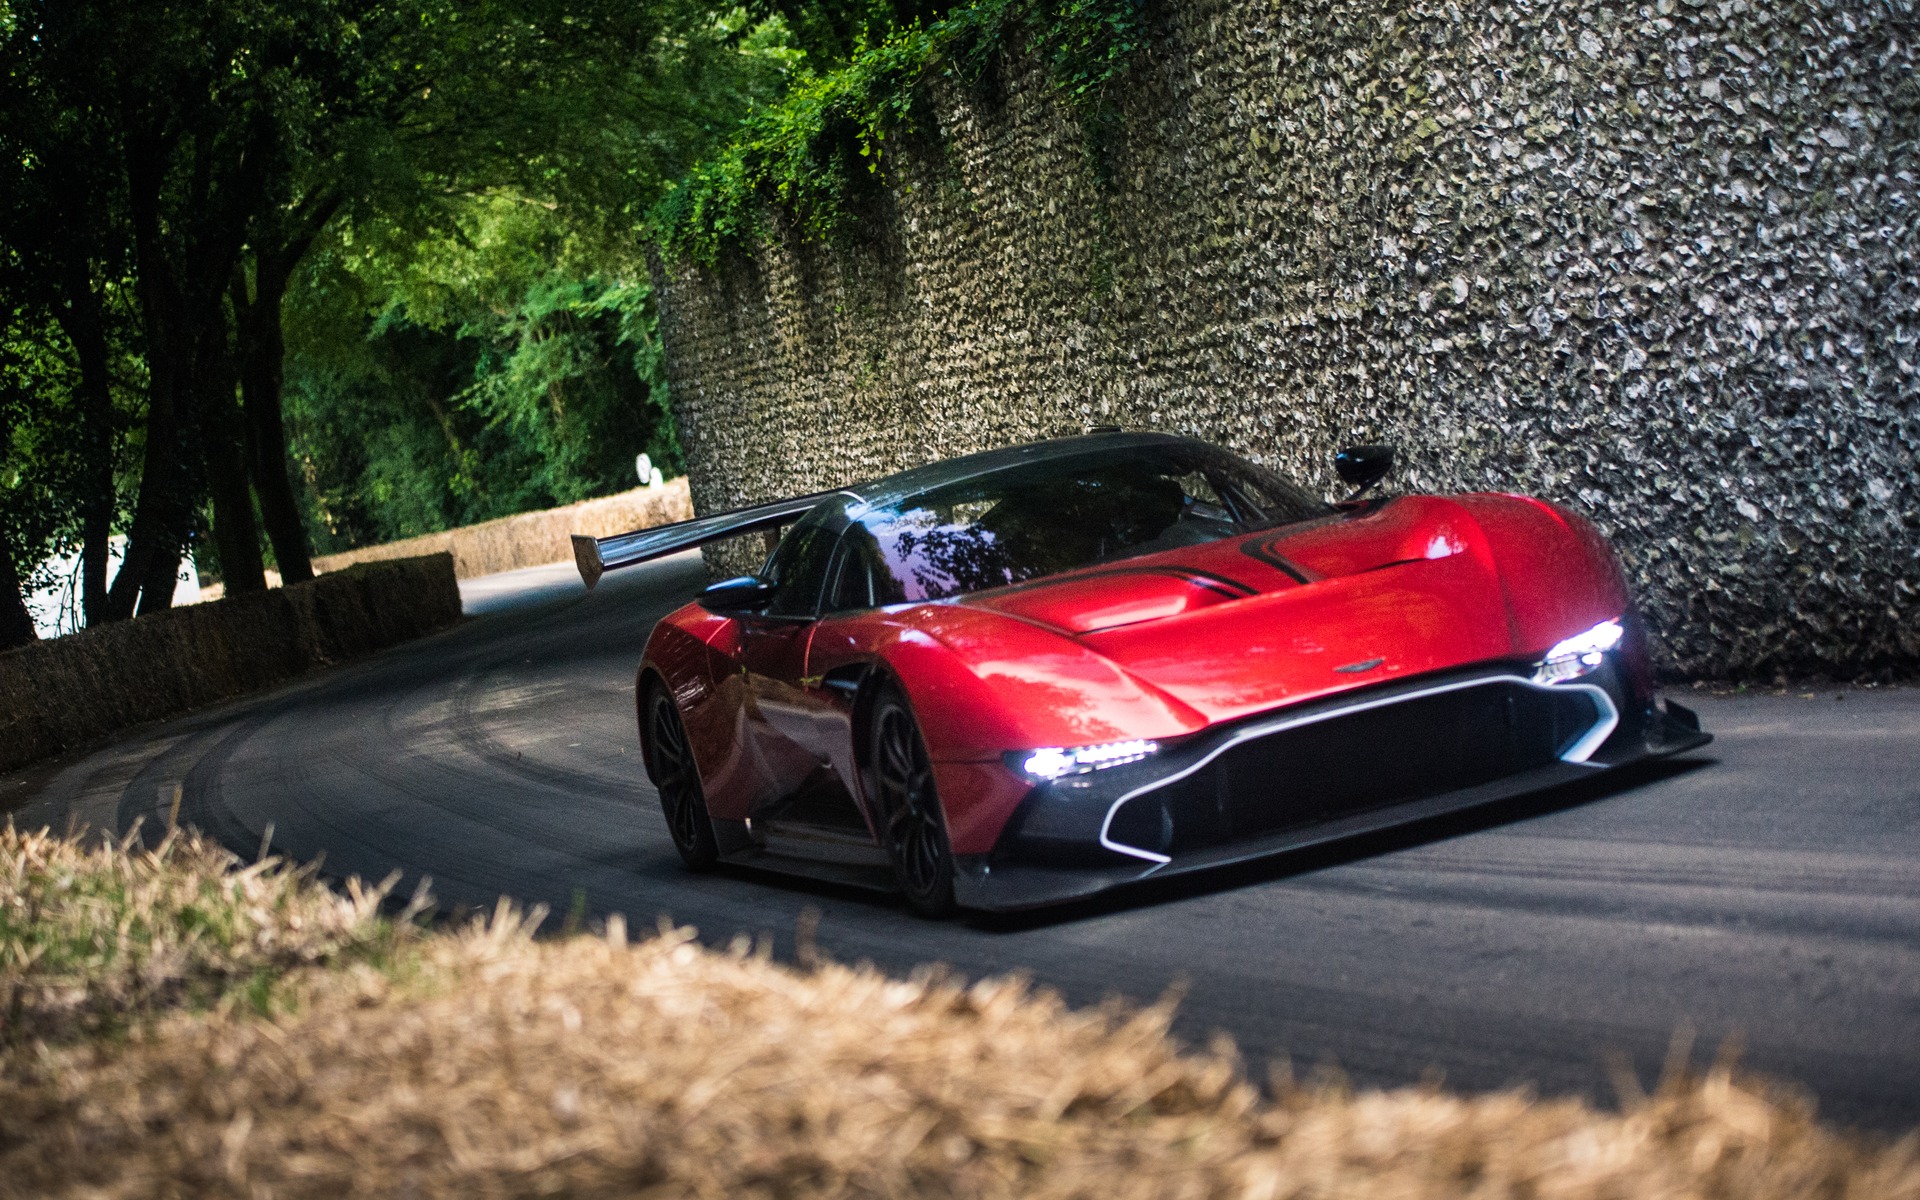 Aston Martin Vulcan in action at the Festival of Speed